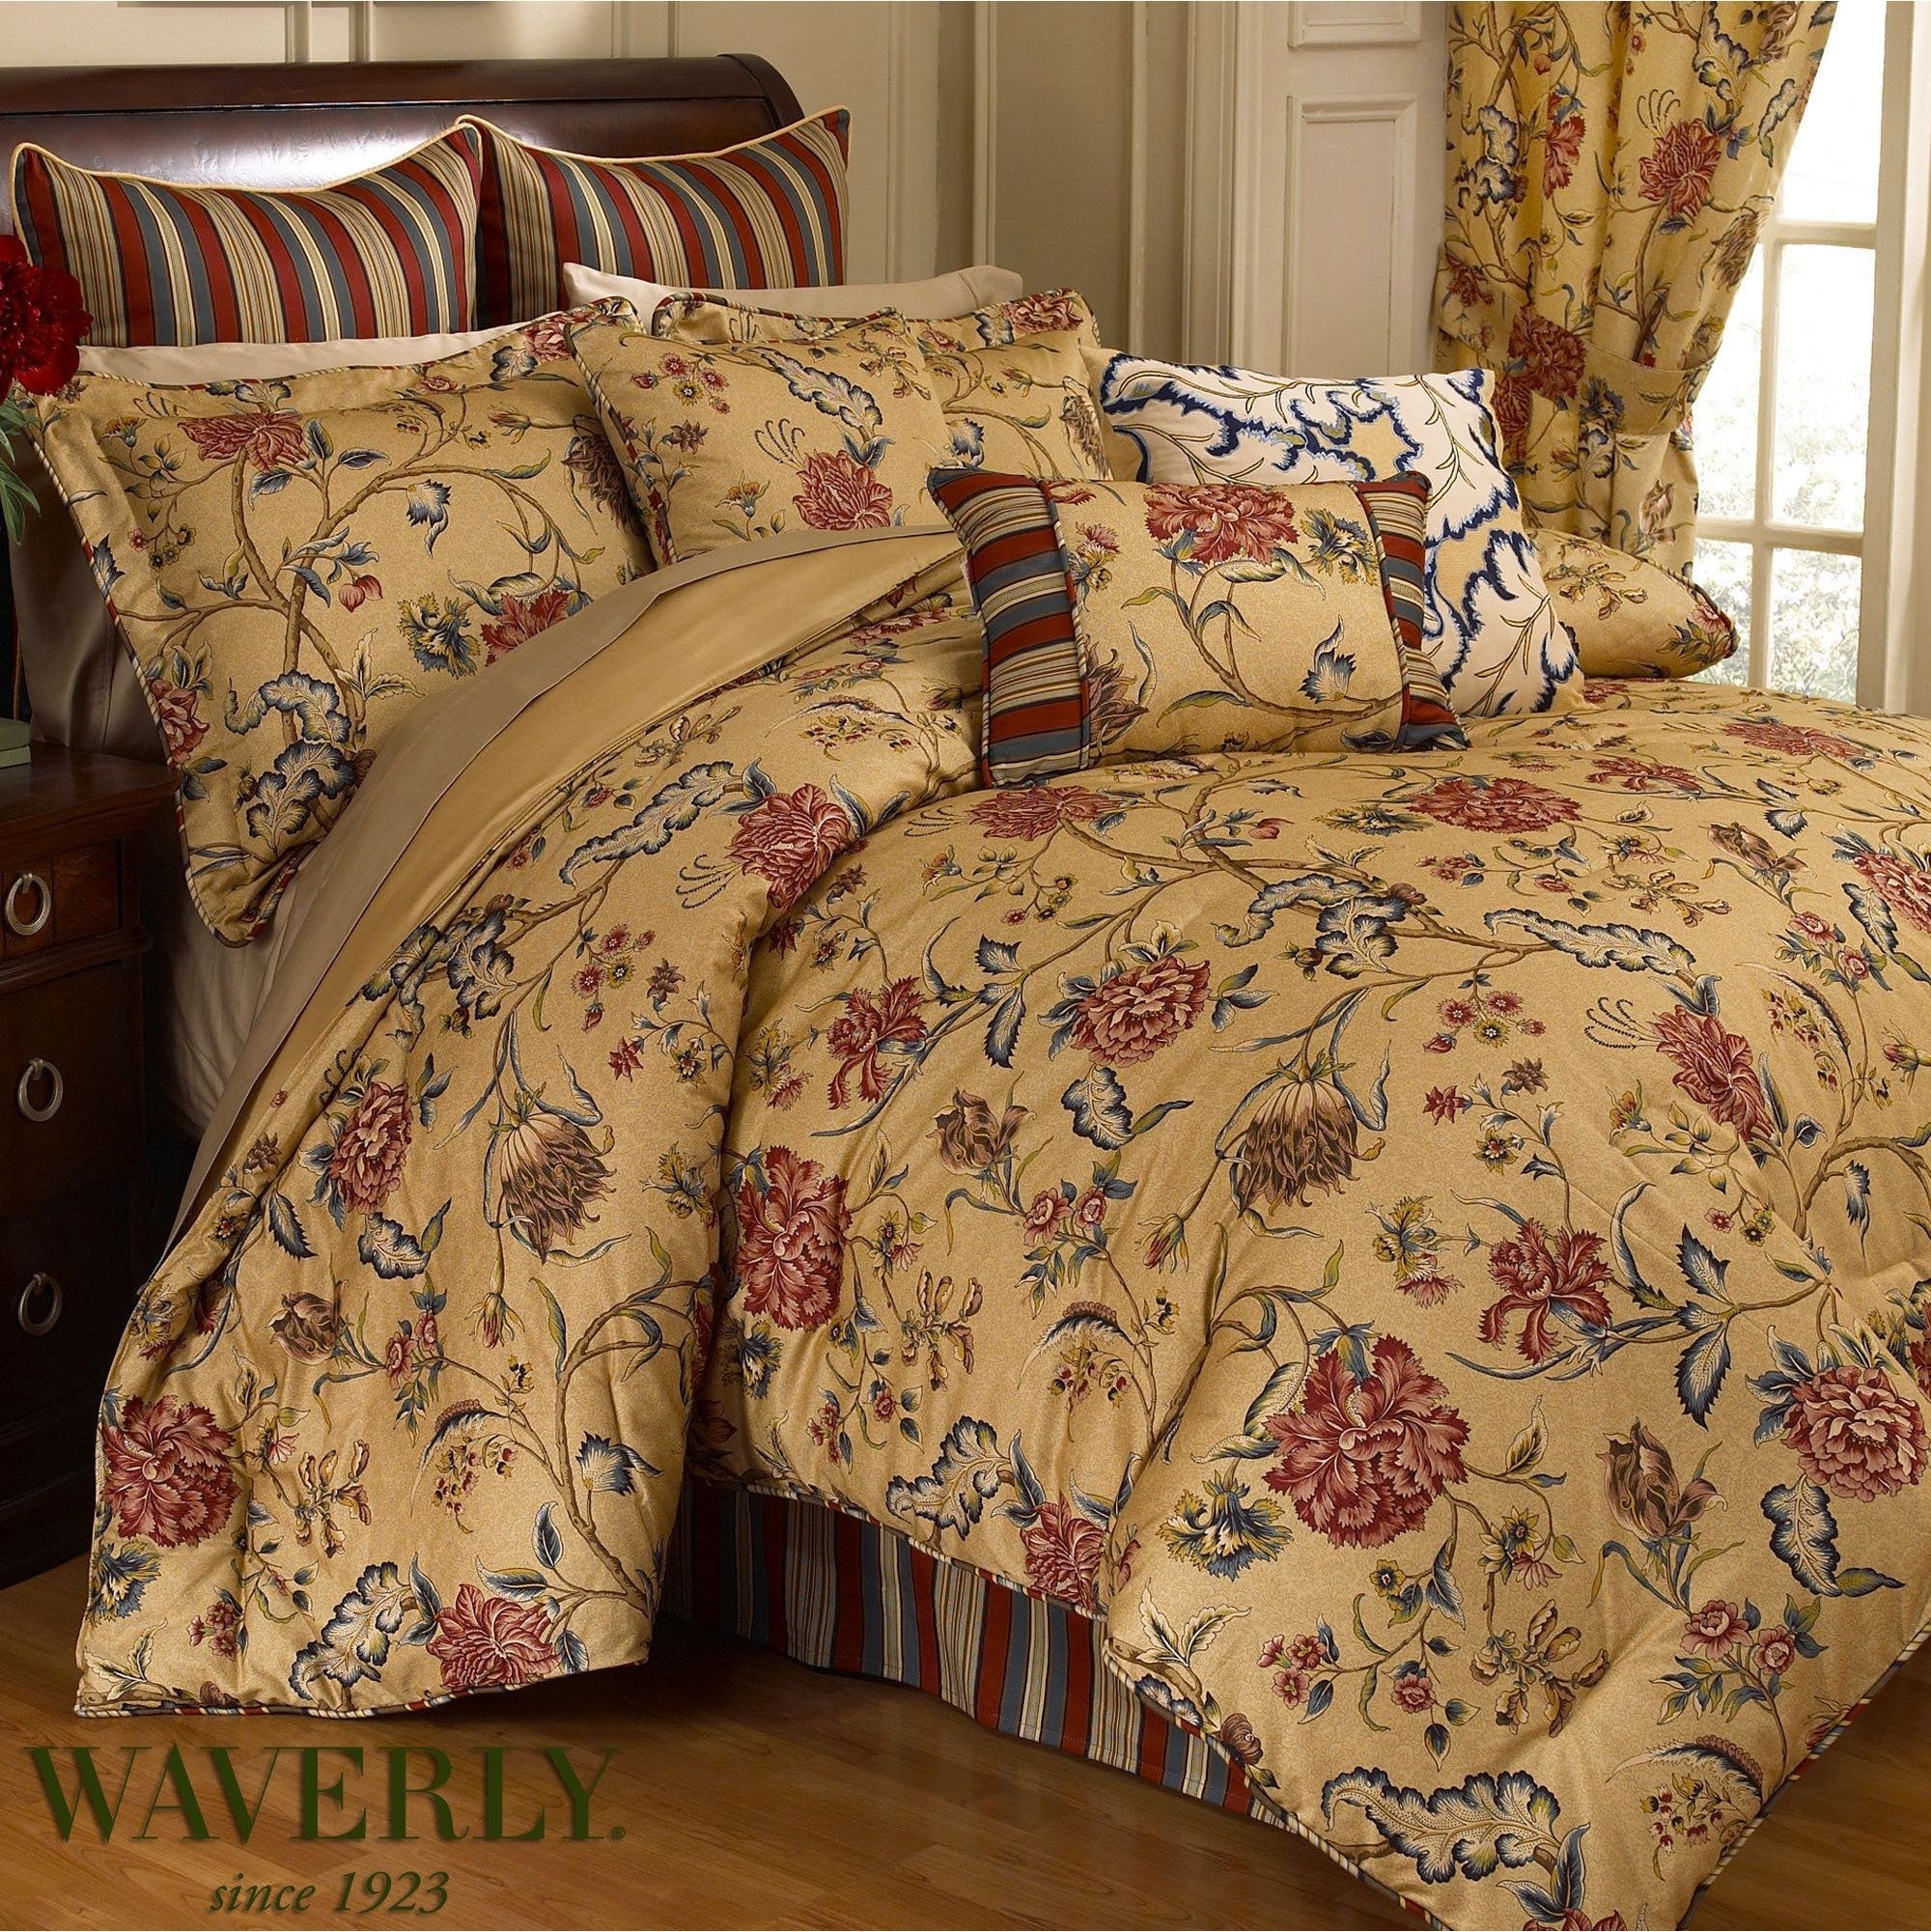 Waverly Spice Of Life Comforter Set King Bedding French Country Cottage Floral 